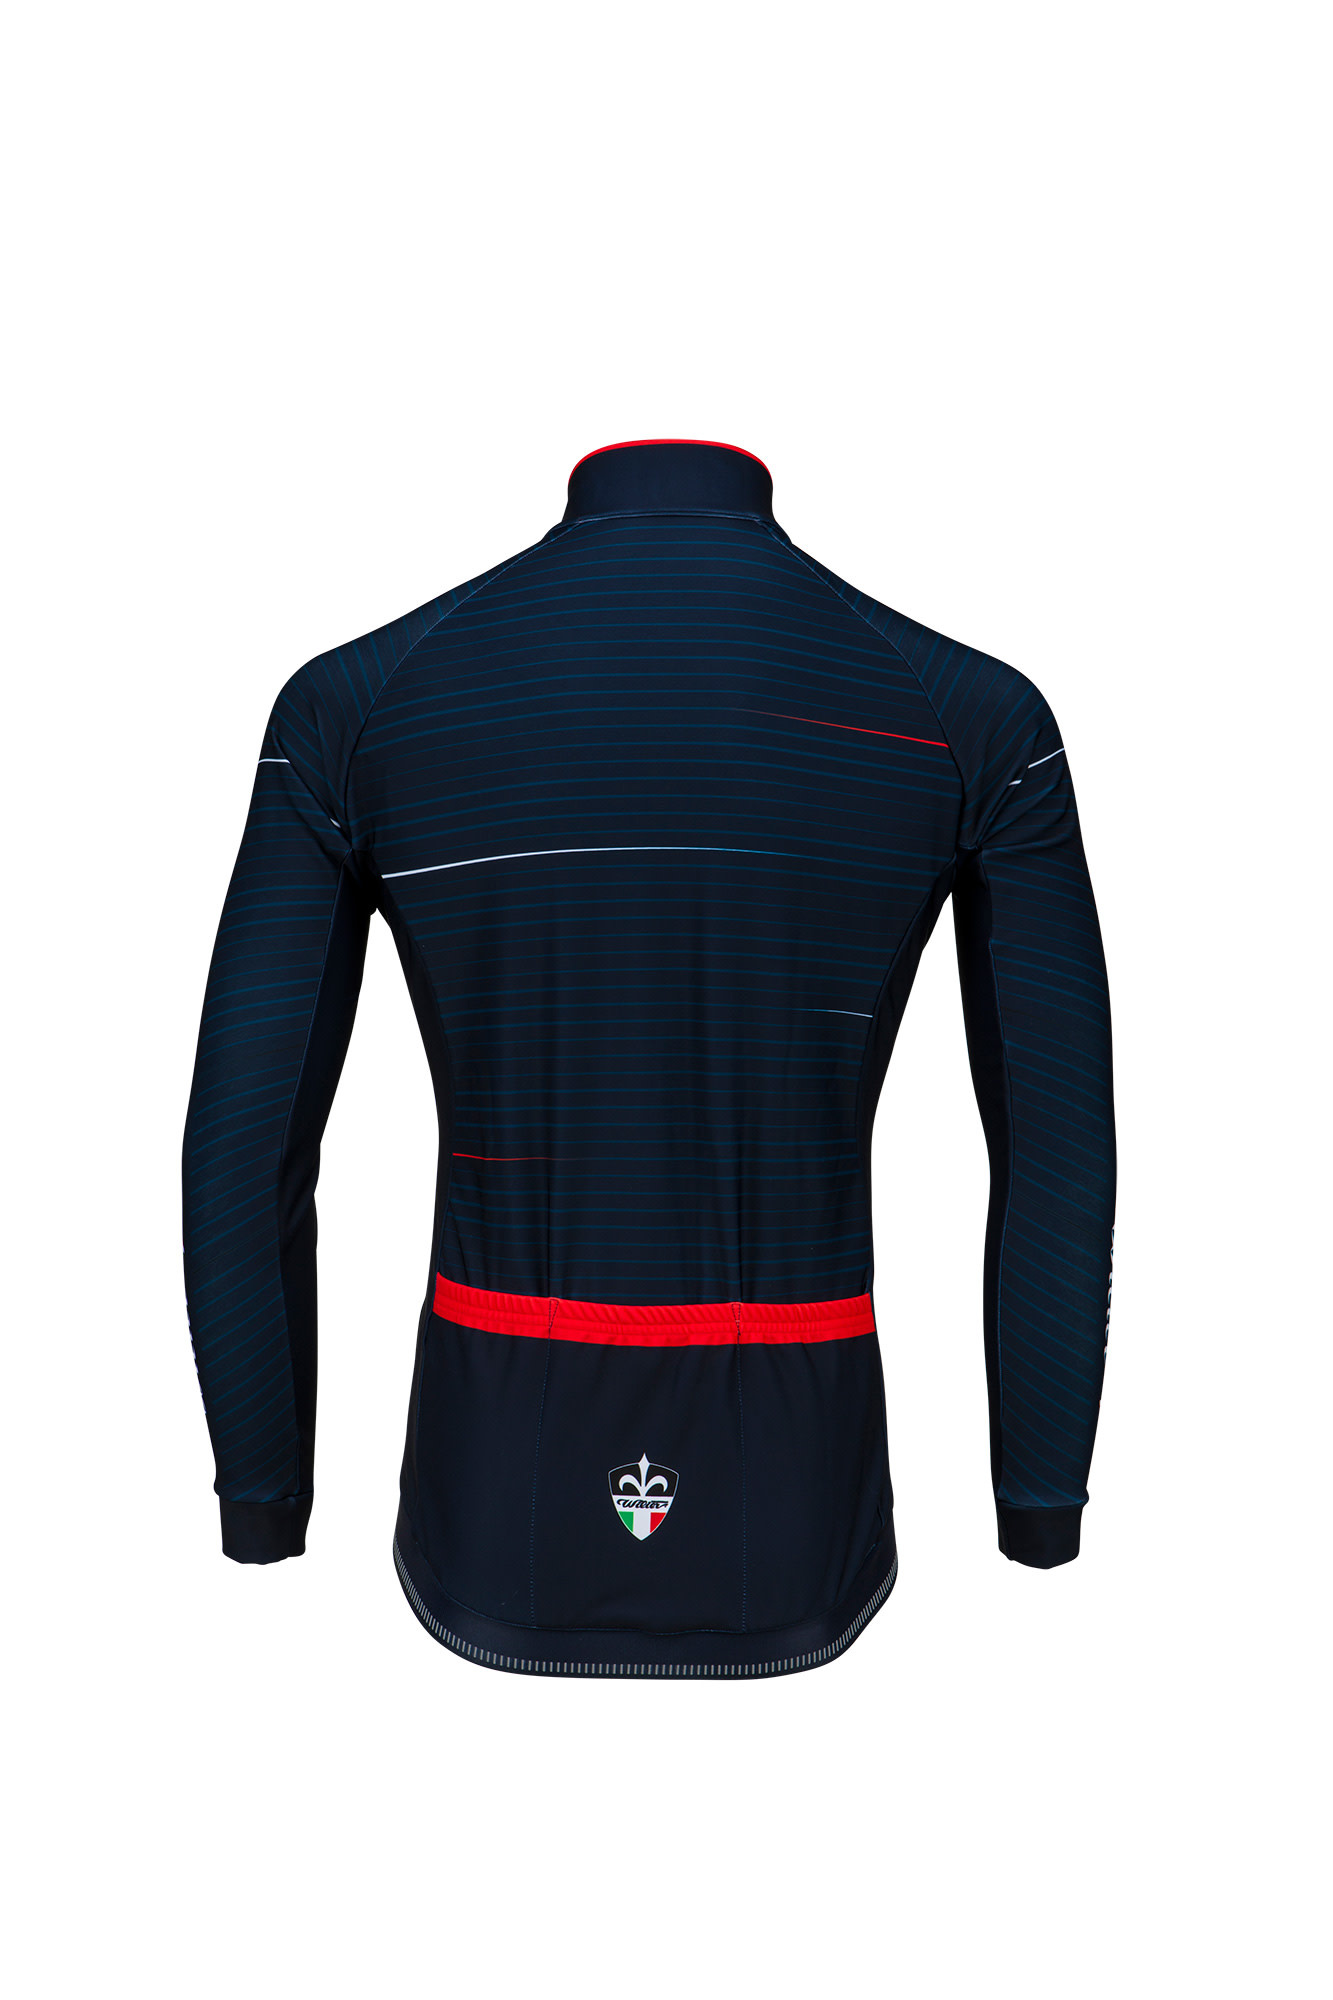 WILIER TRIESTINA WILIER Caivo Long Sleeve Winter Jersey